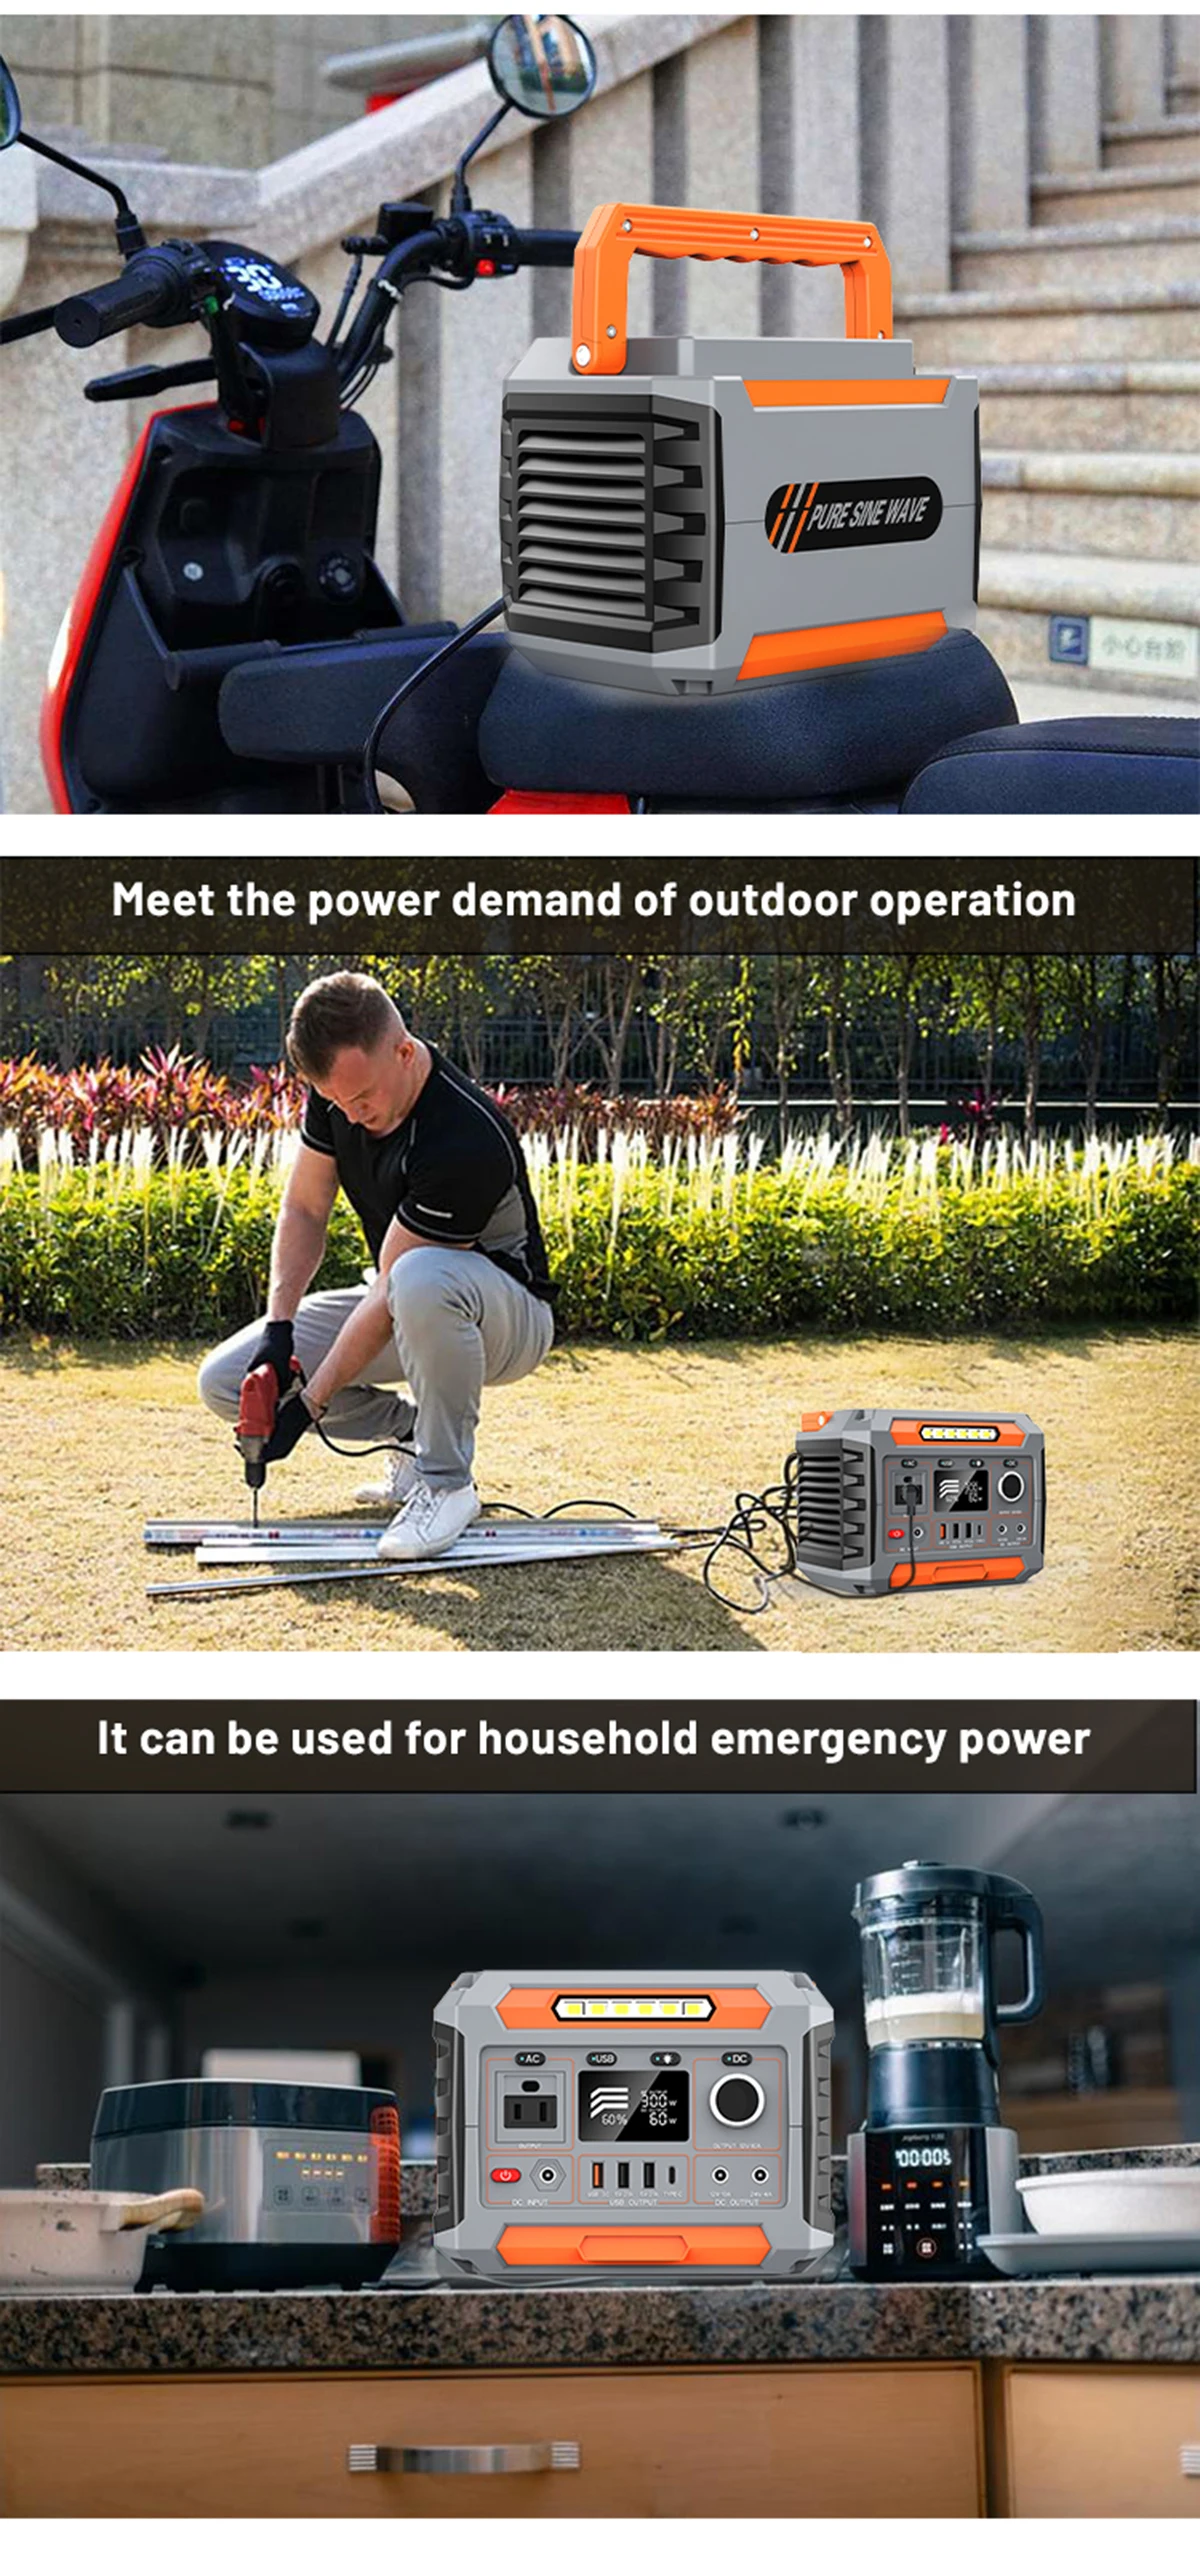 78000mAh Solar Power Pack 288Wh 3.7V Battery Charging Station Portable Generator Emergency Rescue Essential Outdoor Home Storage